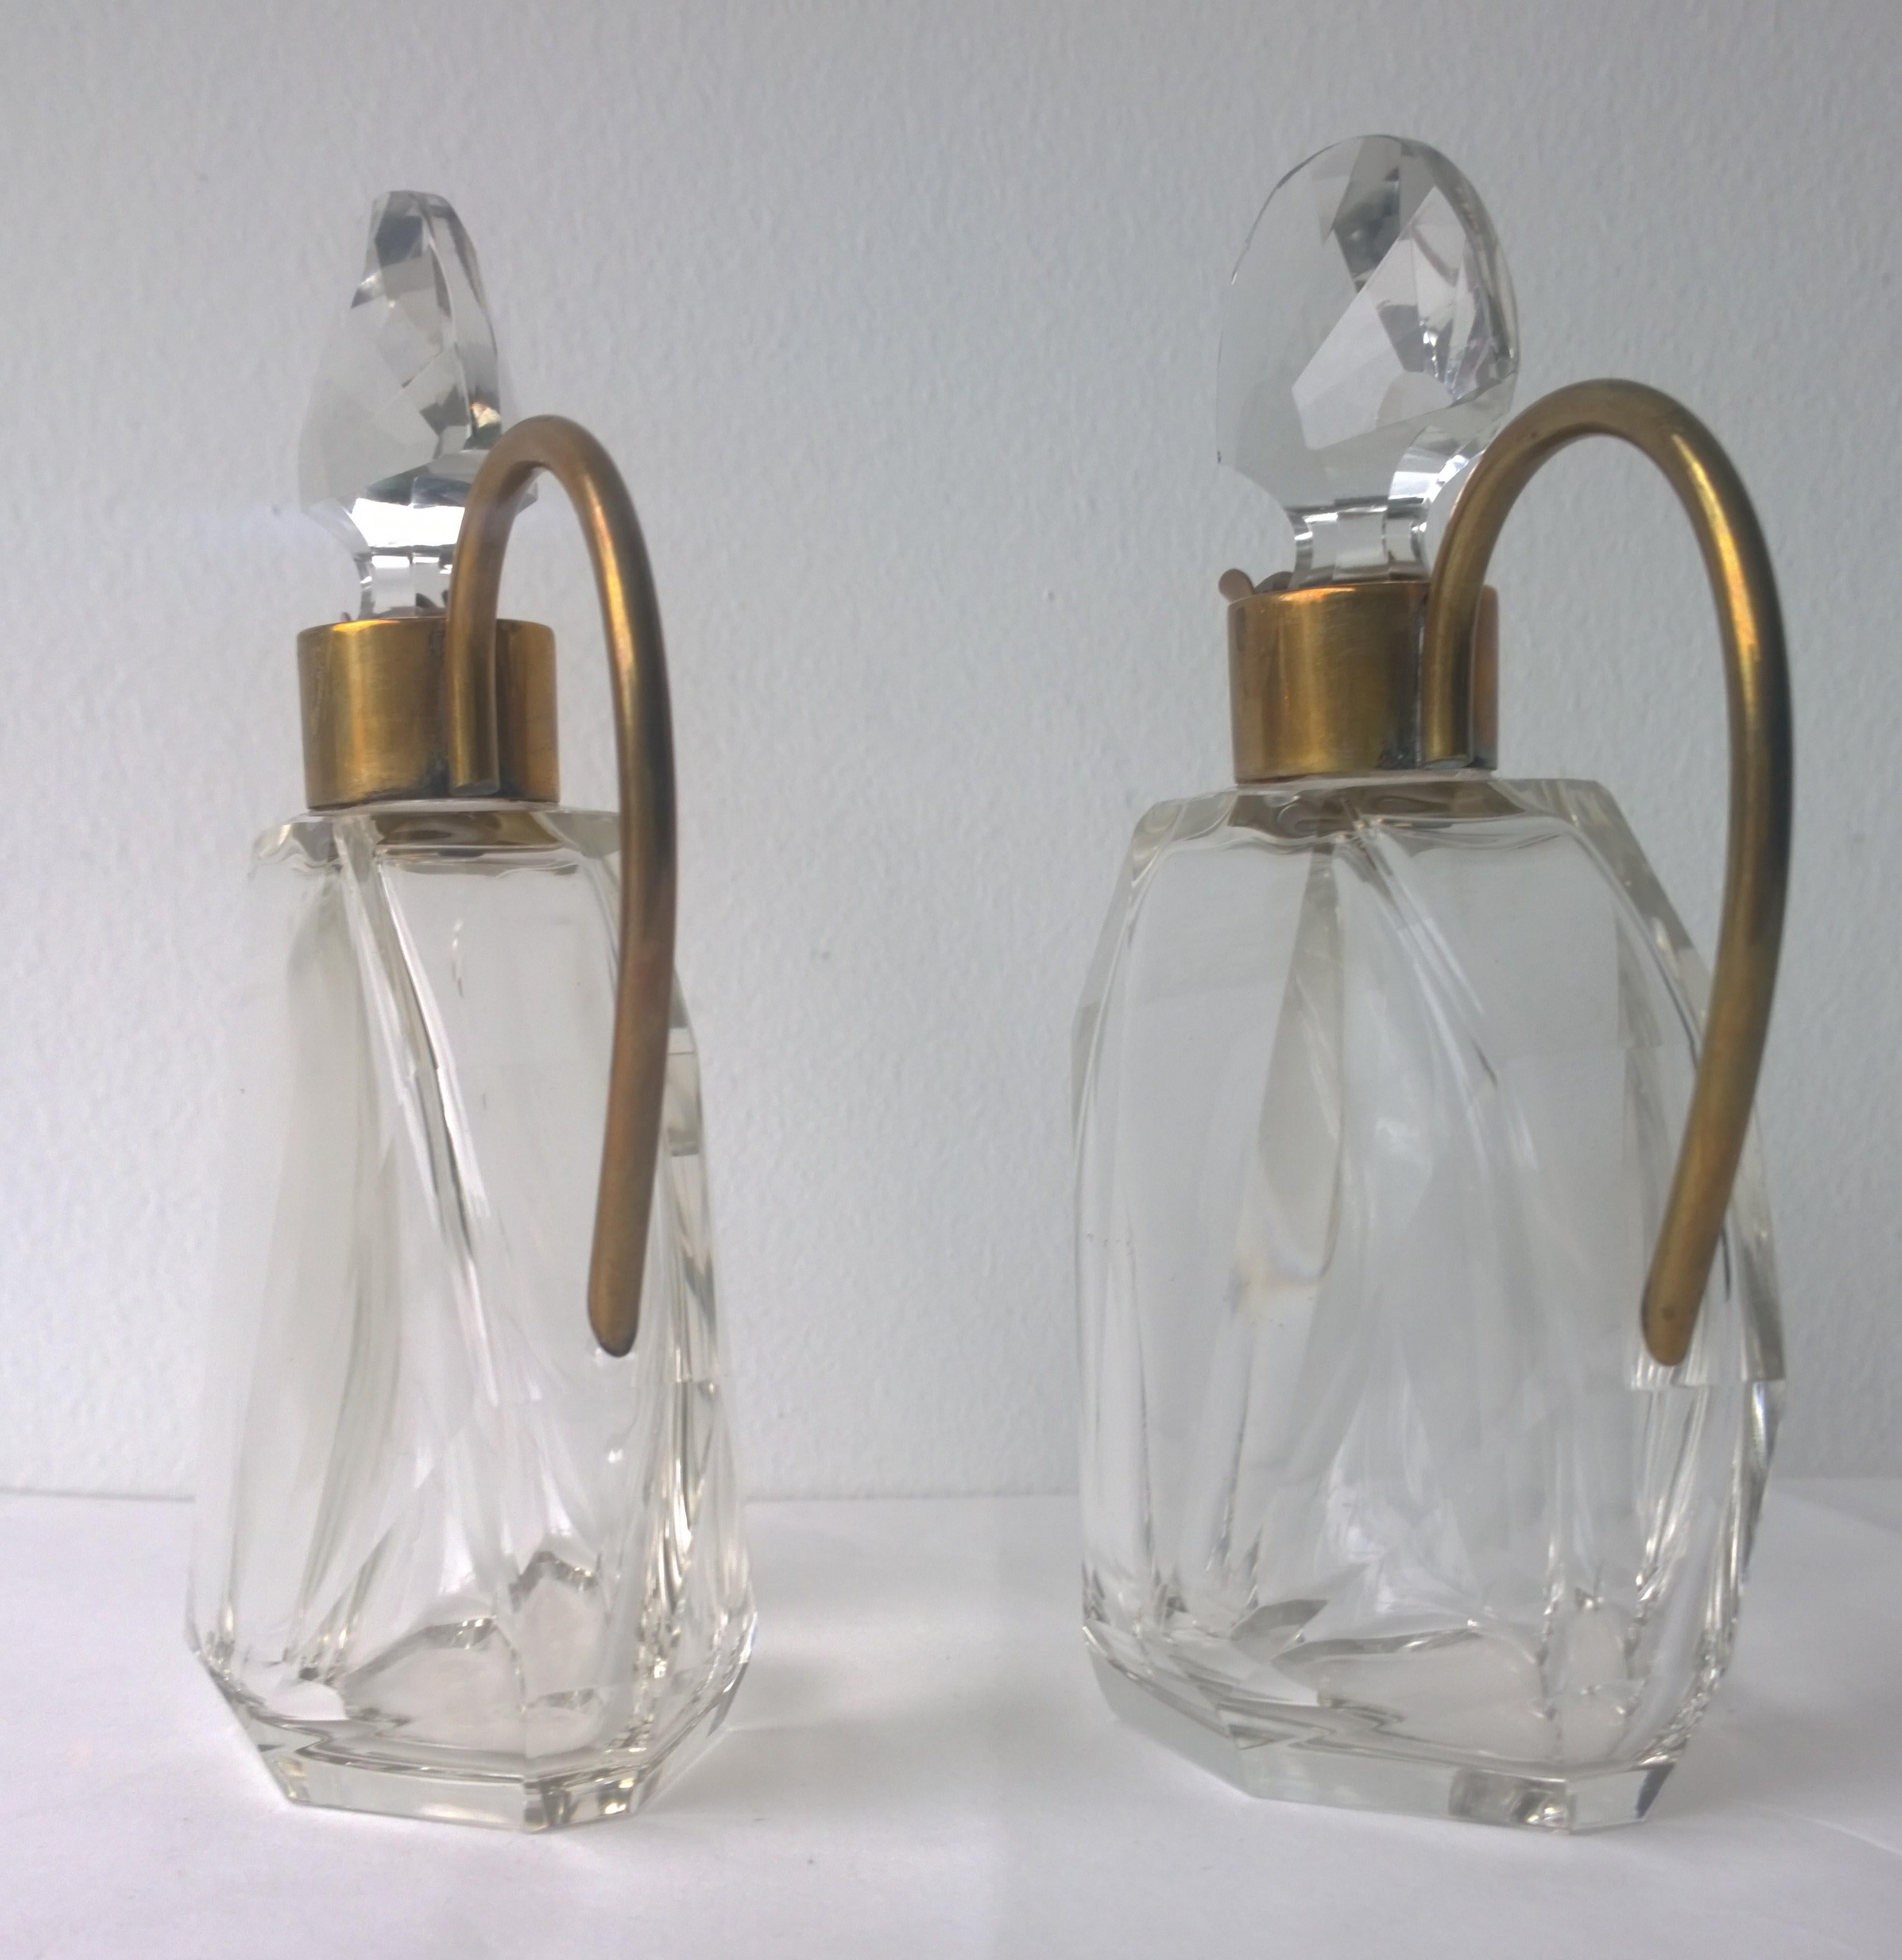 Pair of Art Deco Faceted Glass and Brass Petite Decanters 1